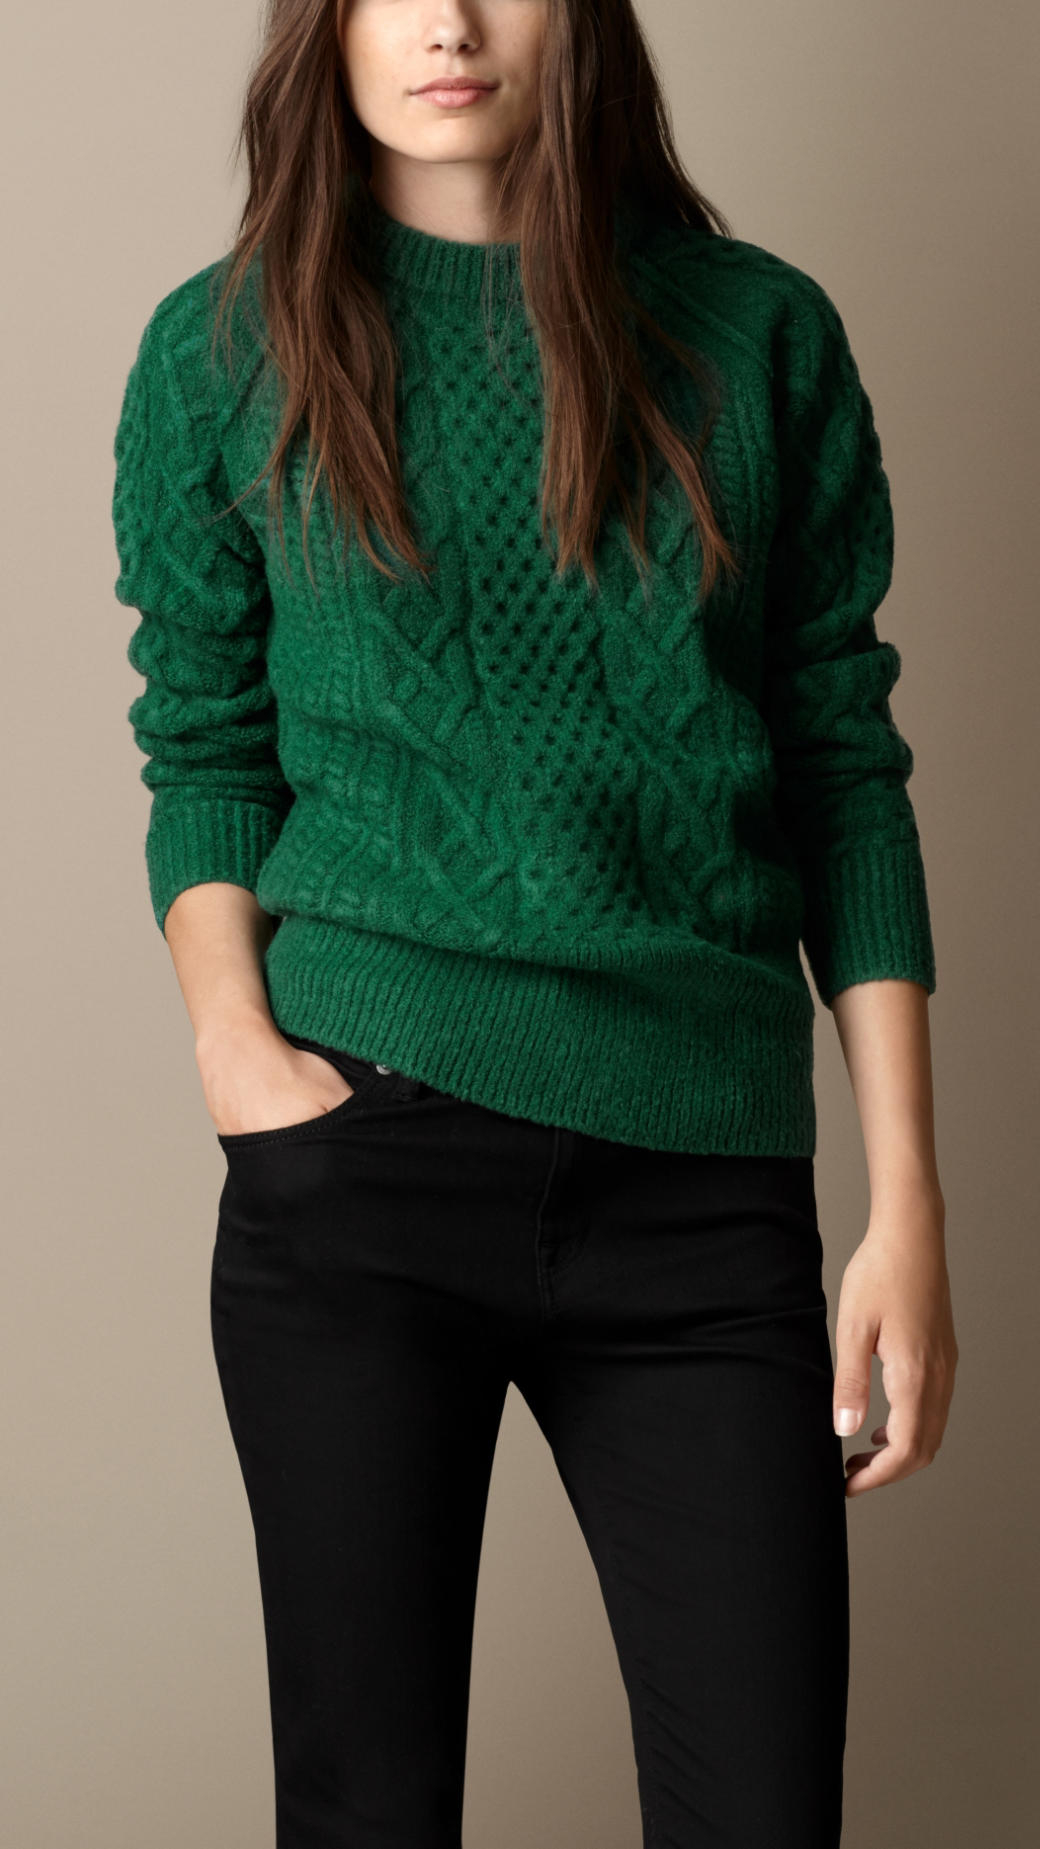 Burberry Wool Blend Cable Knit Sweater in Green - Lyst